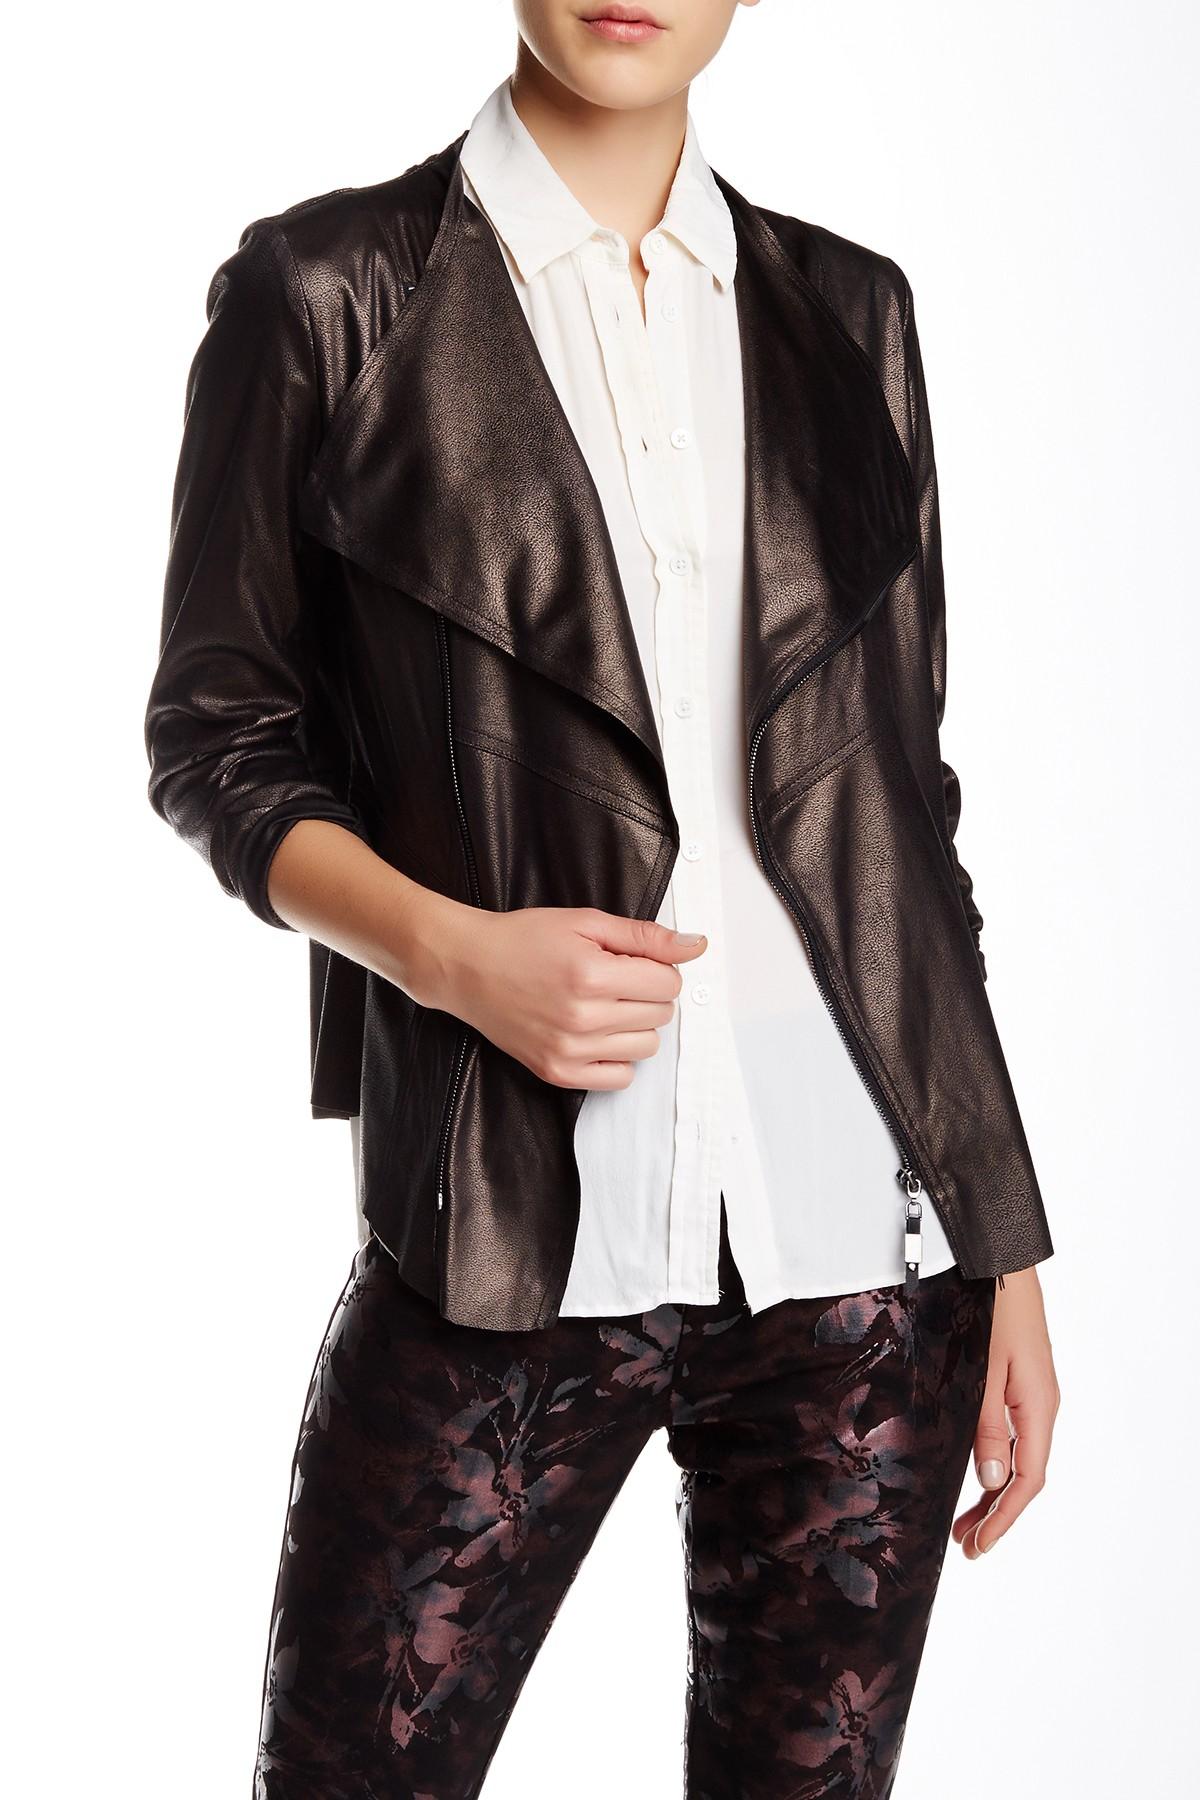 Insight Cracked Faux Leather Zip Jacket in Metallic - Lyst